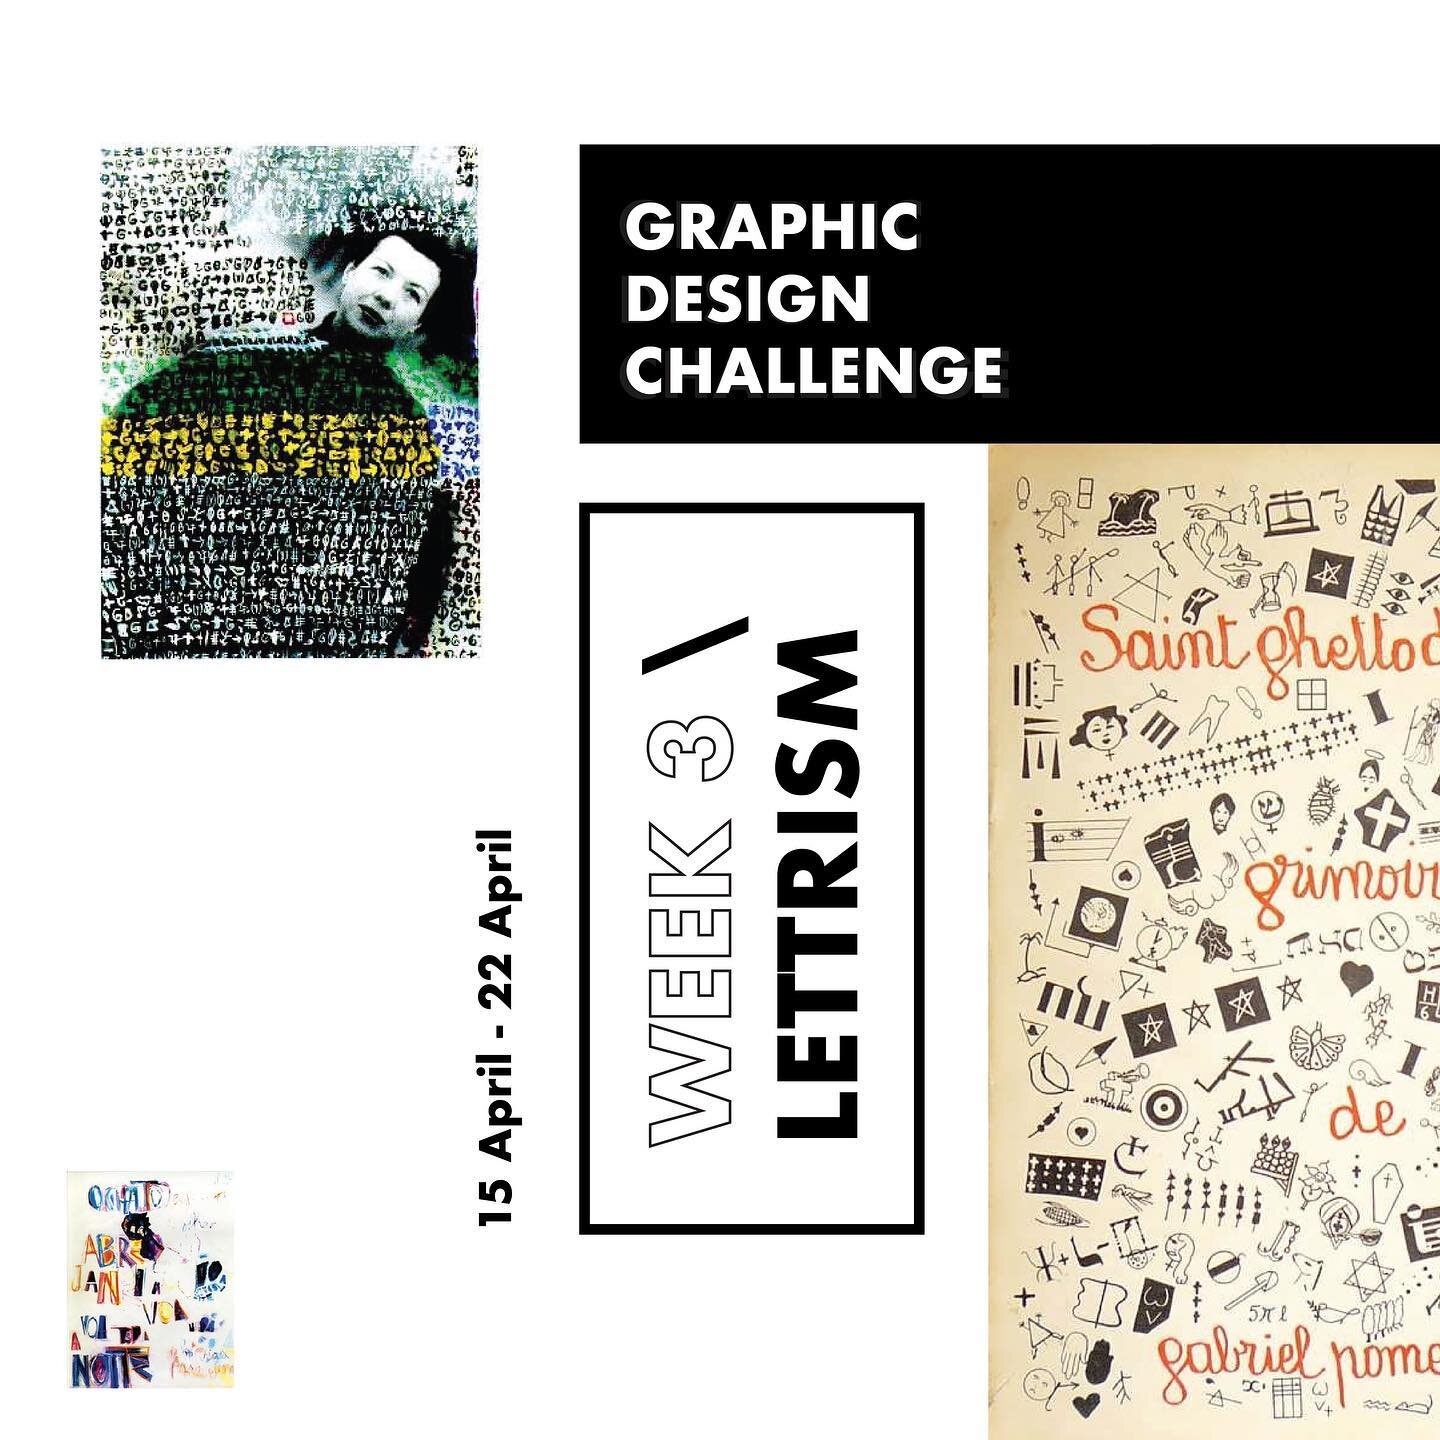 Last chance for you to show us your style! Lettrism week!🖌📝 It&rsquo;s the last week of our weekly #graphicdesign challenge!😋 Take part and submit your art piece for a chance to win special tailormade prizes🎁

We&rsquo;ll be reposting your beauti